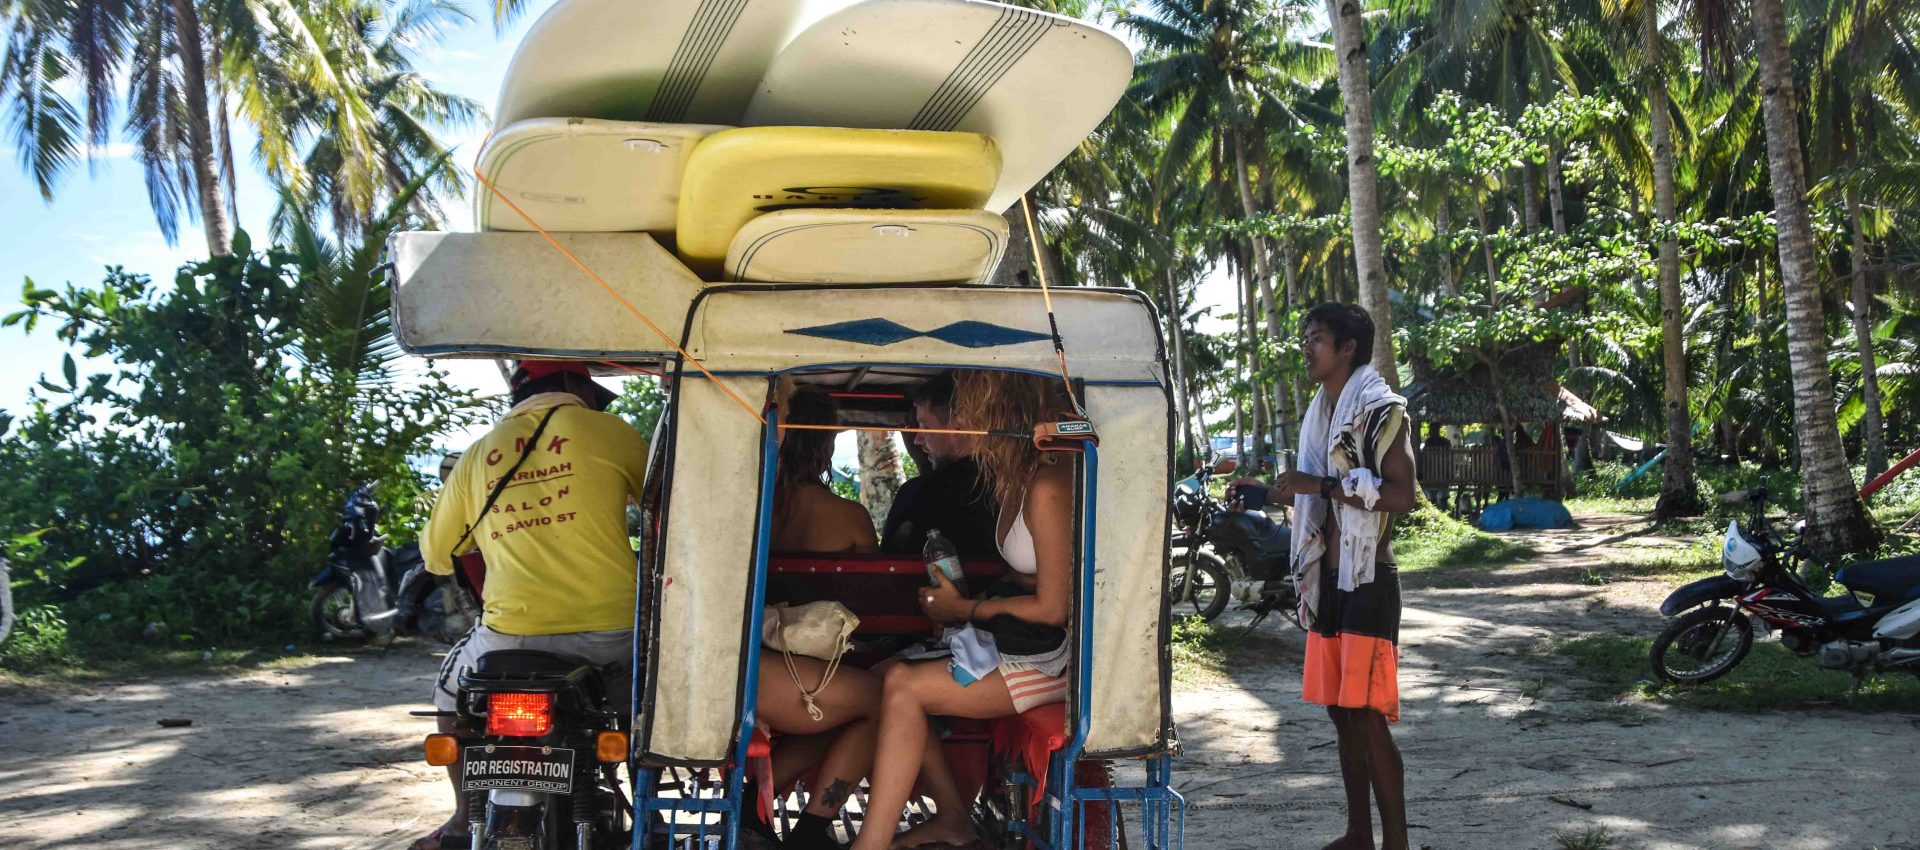 Habal-Habal is the local version of a Tuk-Tuk, the perfect vehicle to take us surfing.